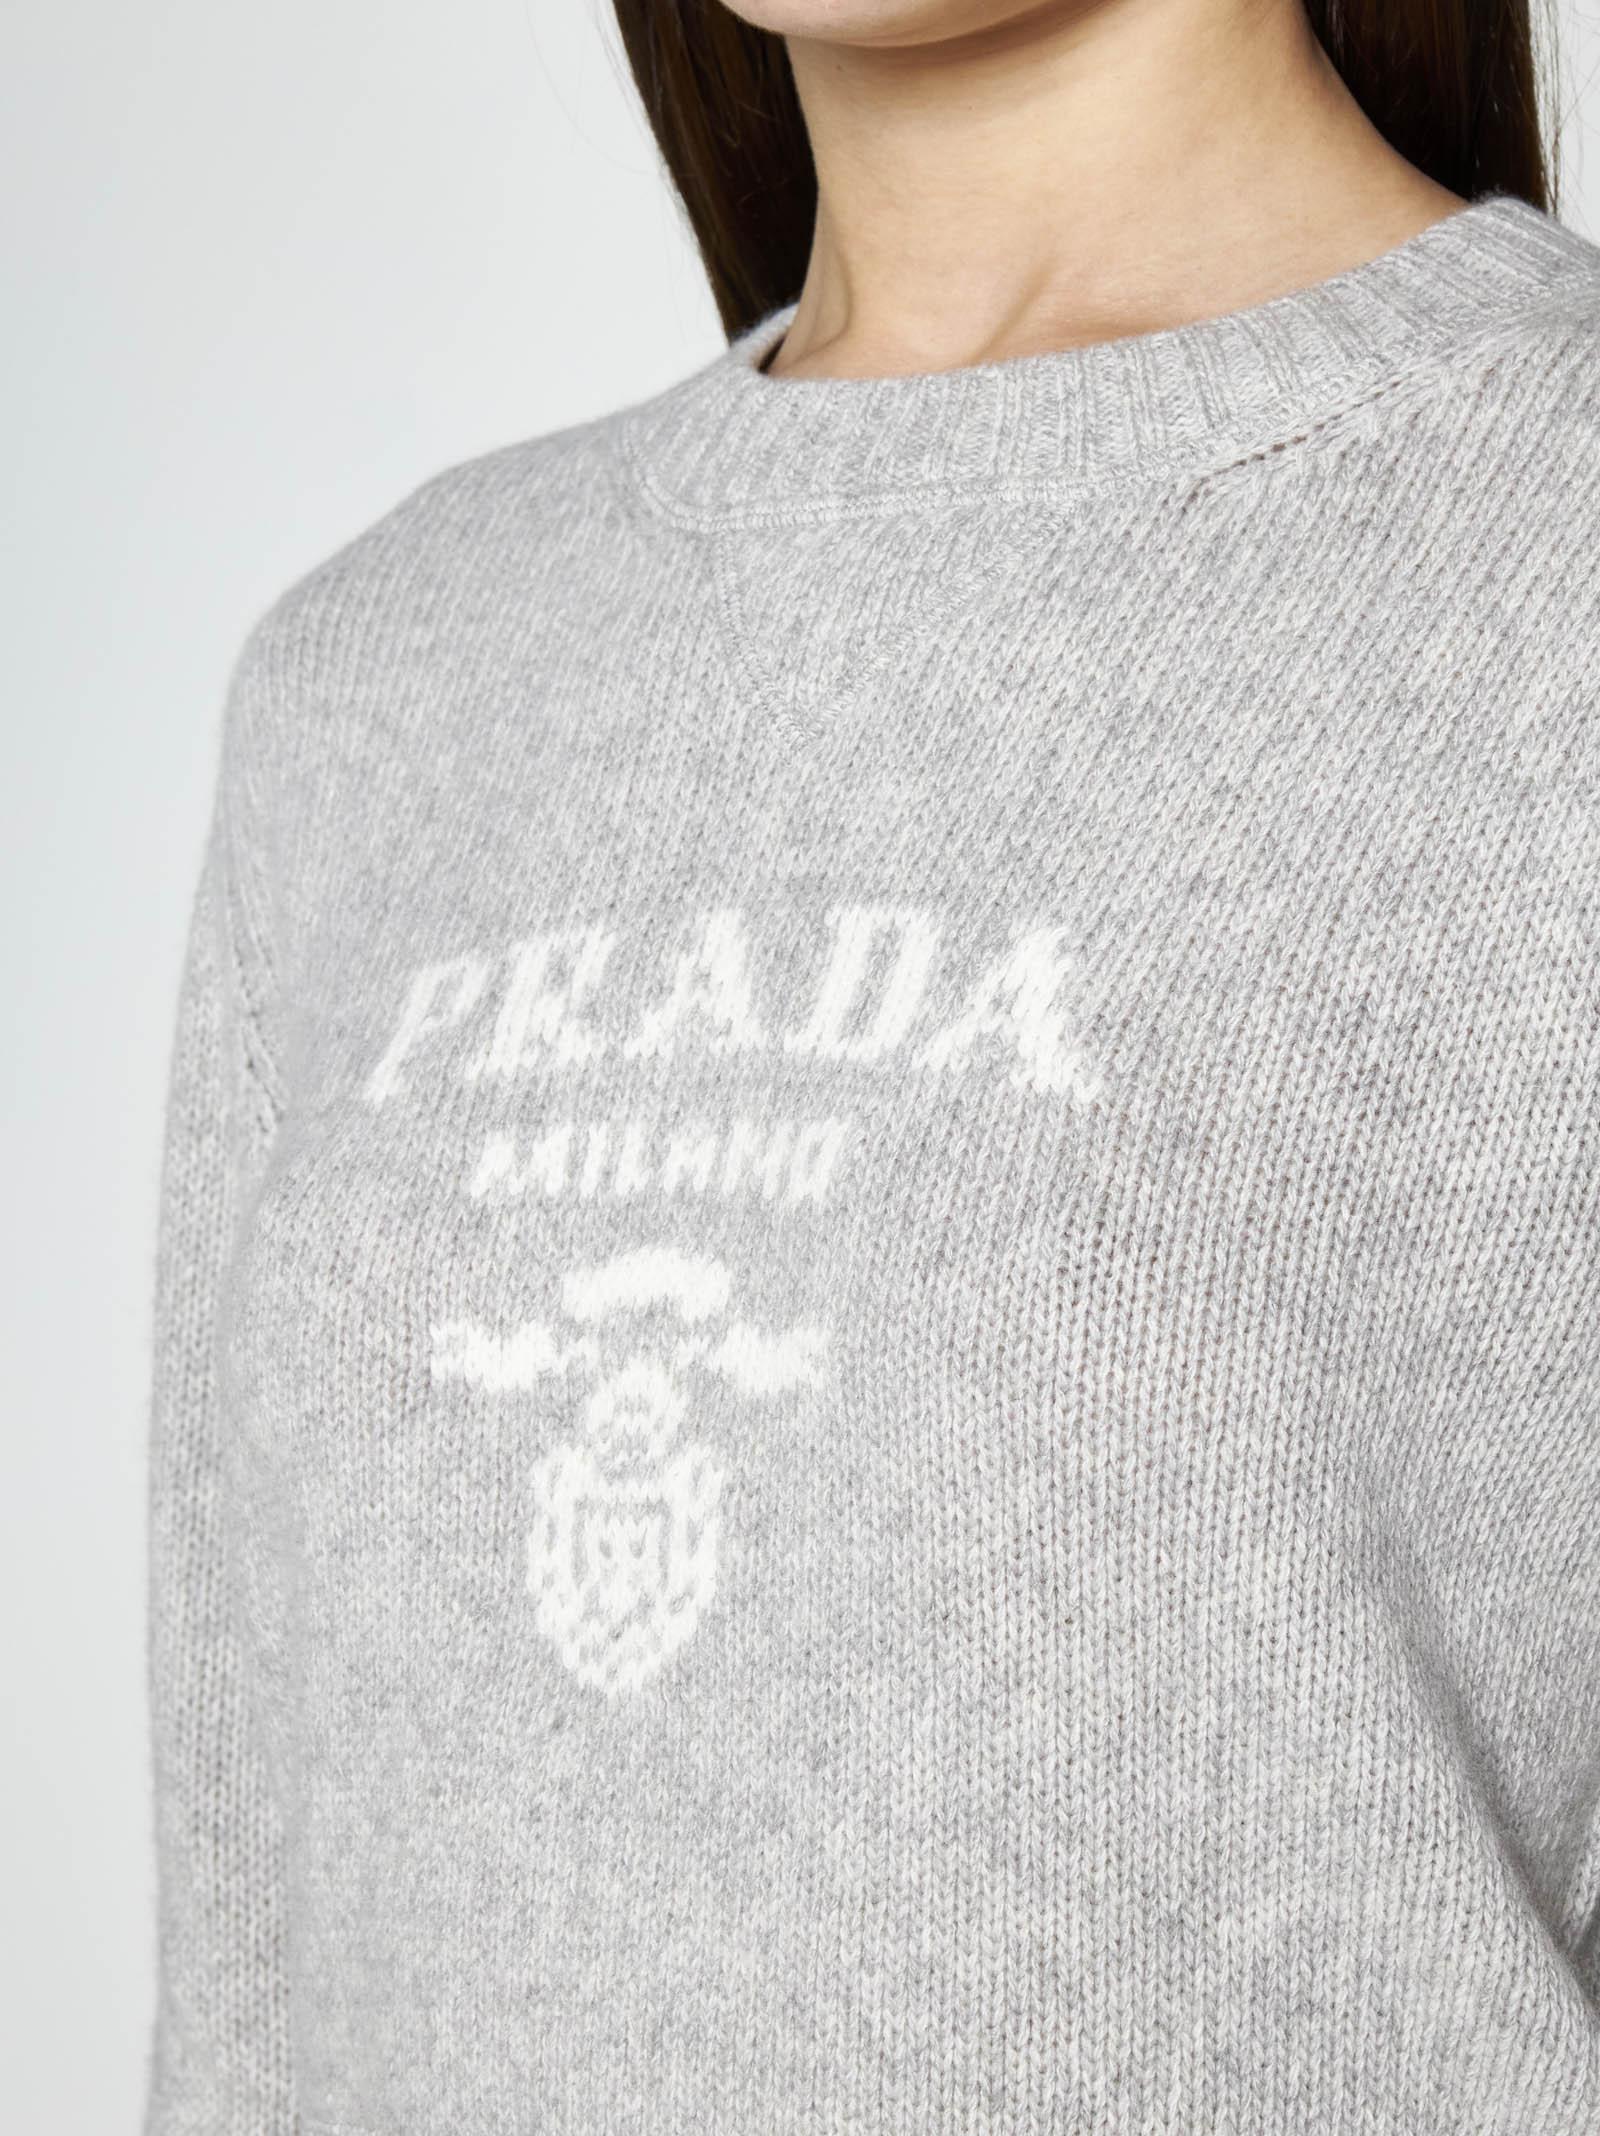 Prada Logo Wool And Cashmere Sweater in White | Lyst